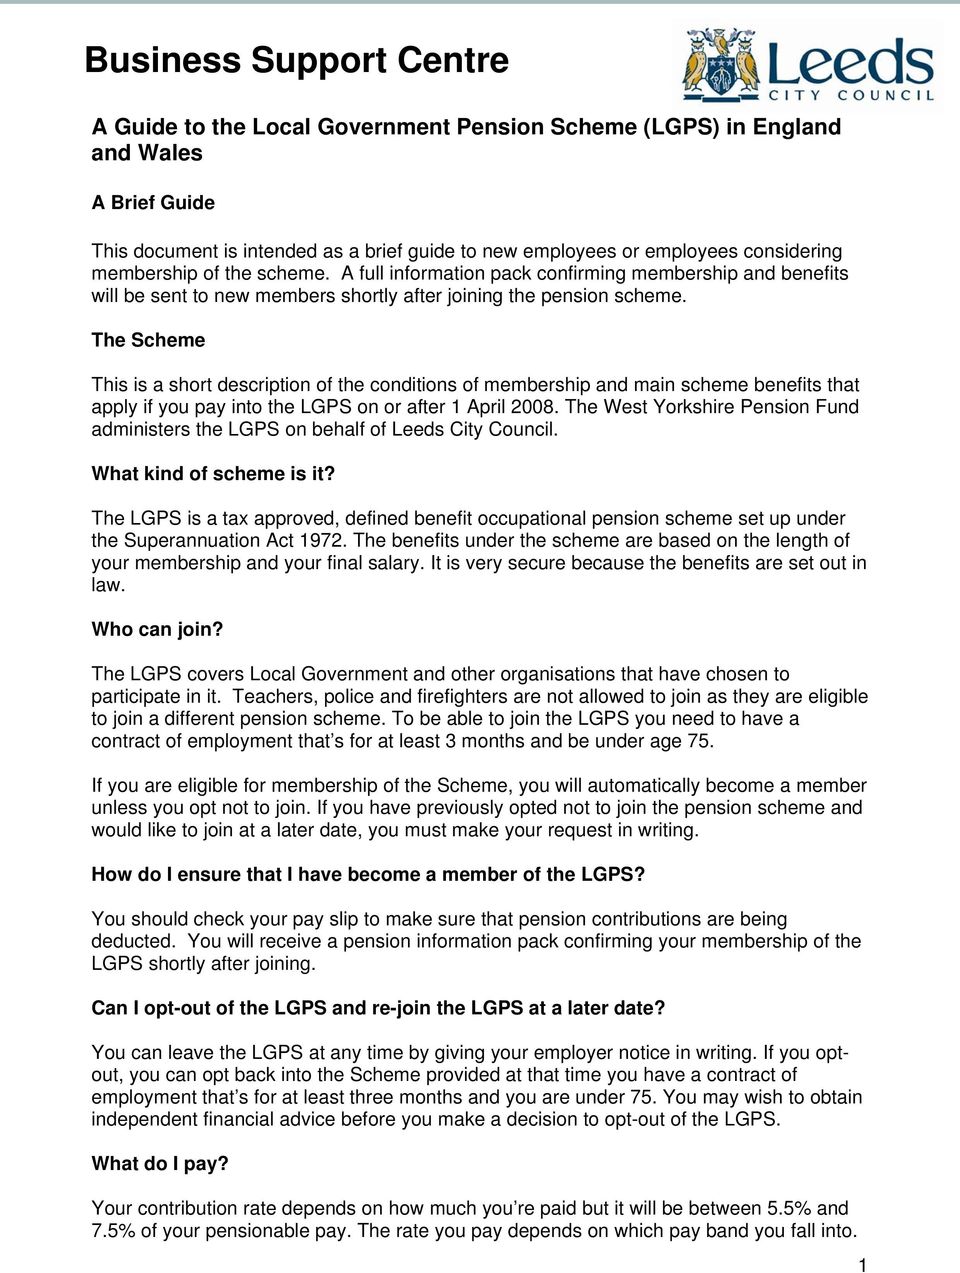 The Scheme This is a short description of the conditions of membership and main scheme benefits that apply if you pay into the LGPS on or after 1 April 2008.